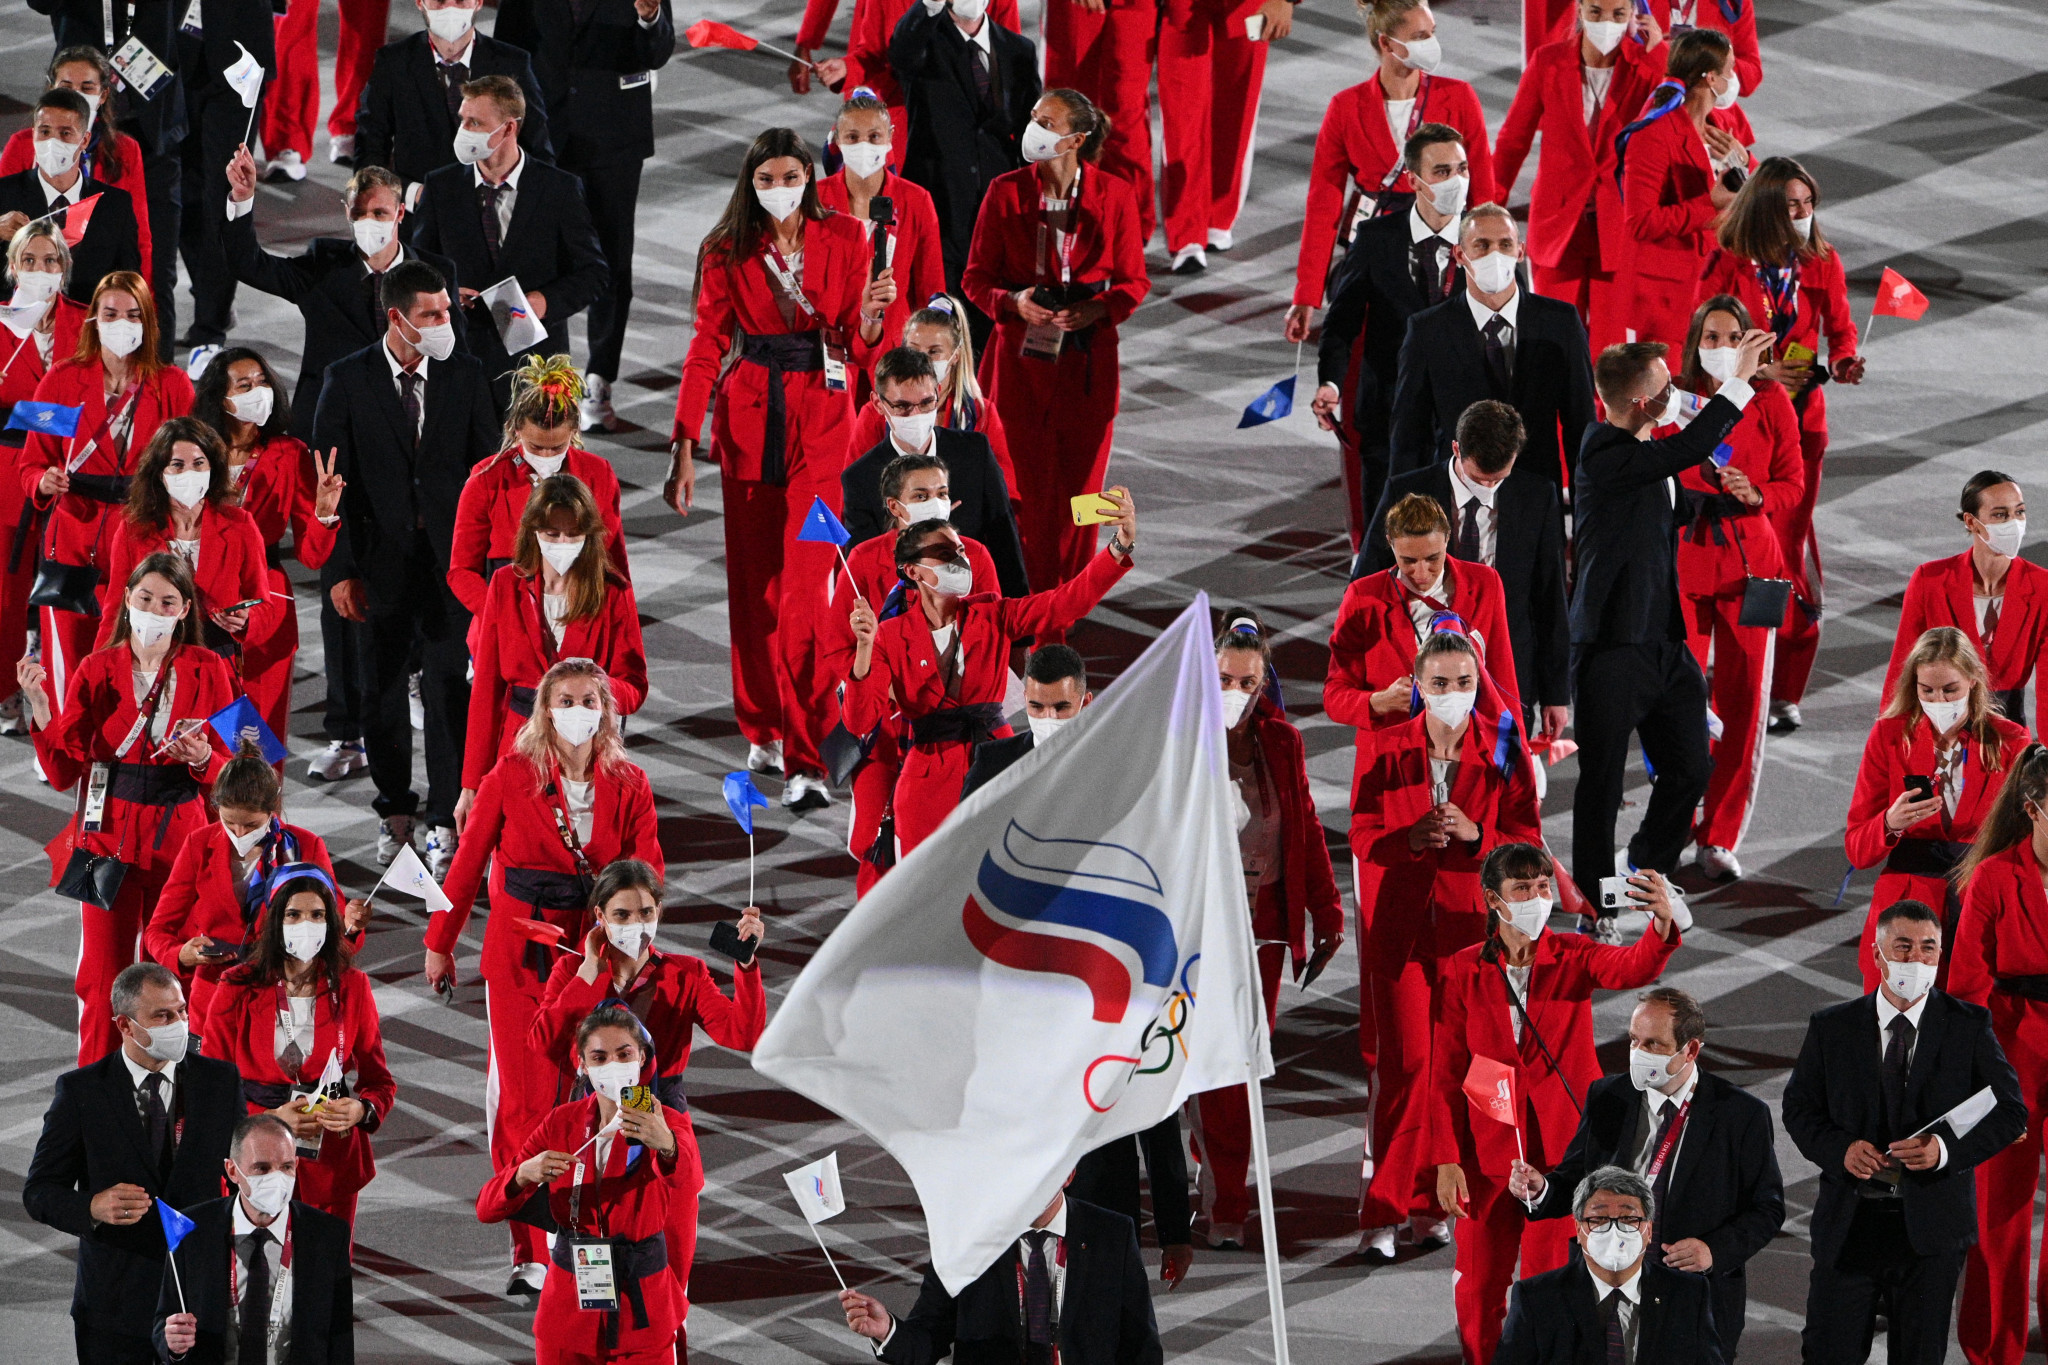 A team of 334 competed under the Russian Olympic Committee flag at the Tokyo Olympics two years ago ©Getty Images